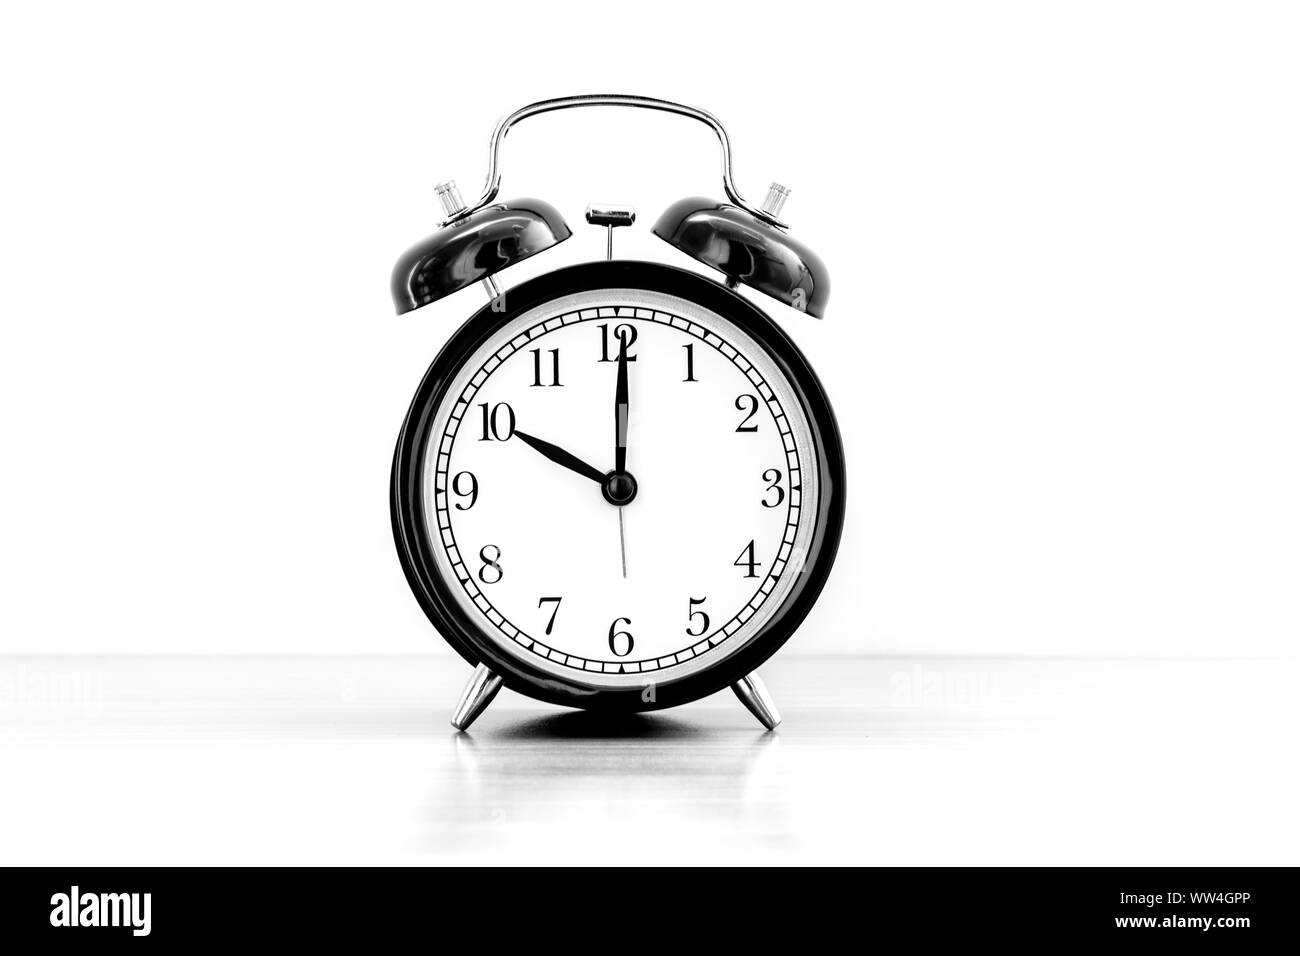 Clock Black and White Stock Photos & Images - Alamy